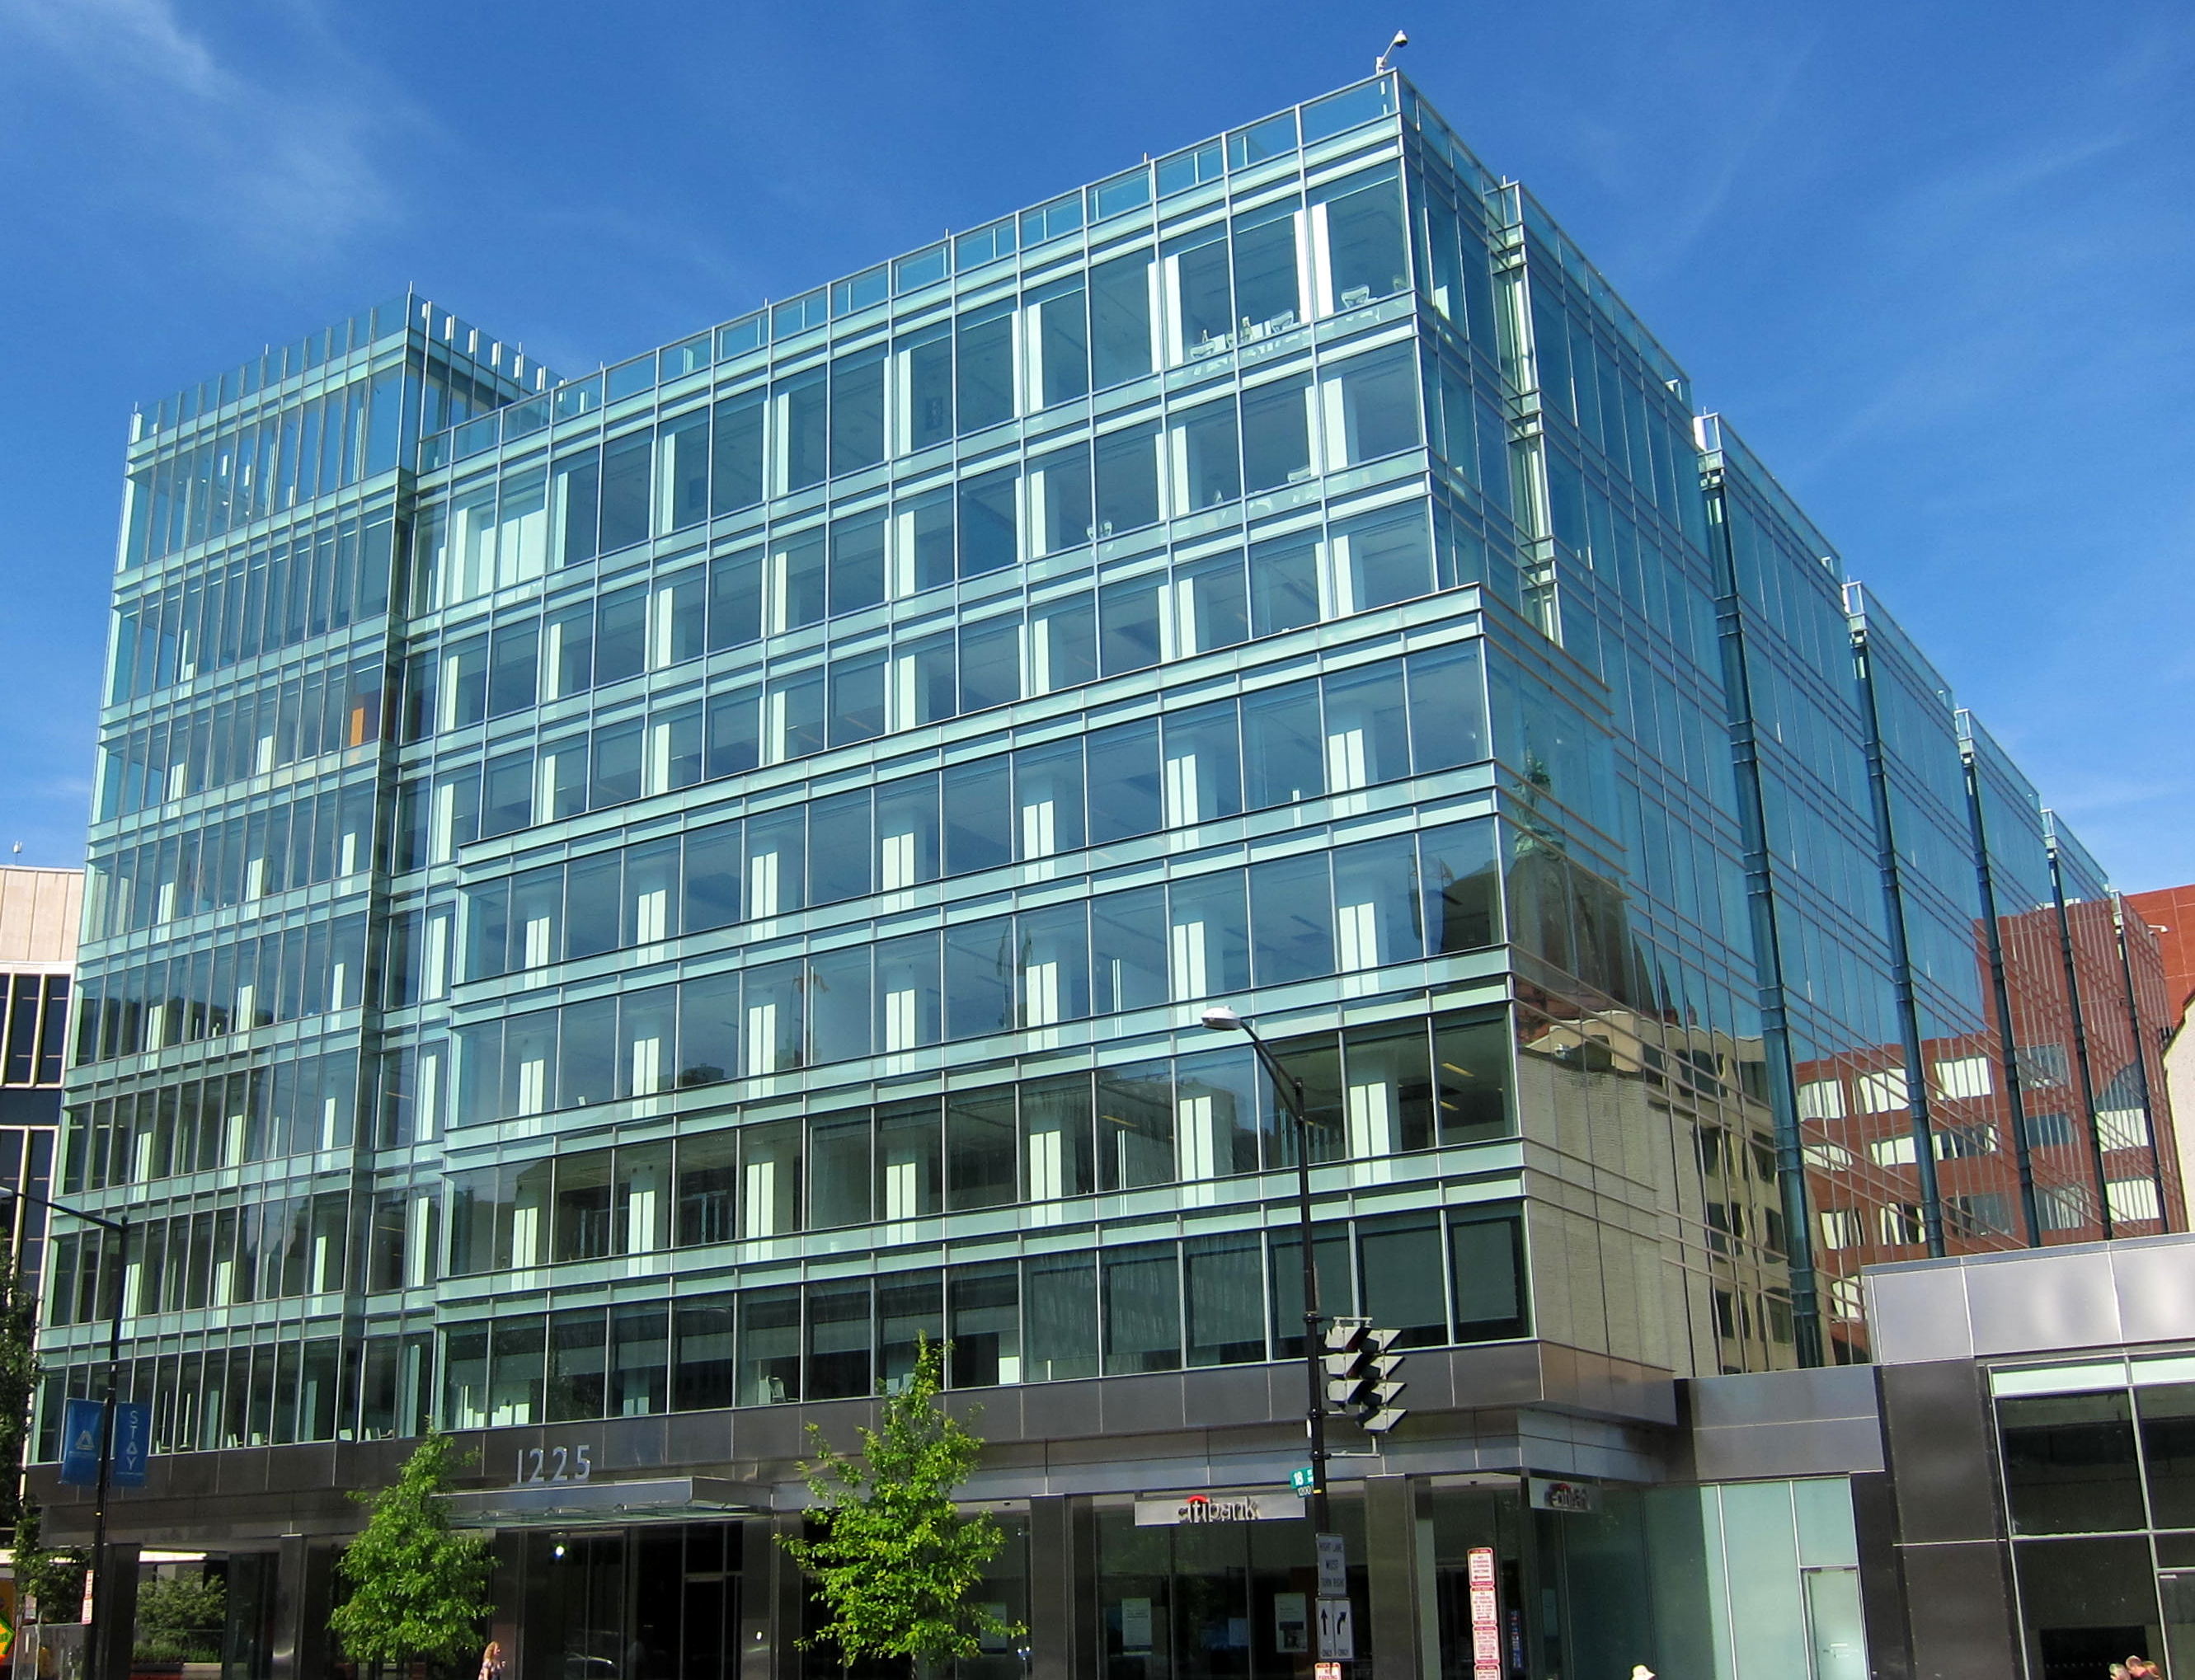 edeveloped office building with LEED Platinum